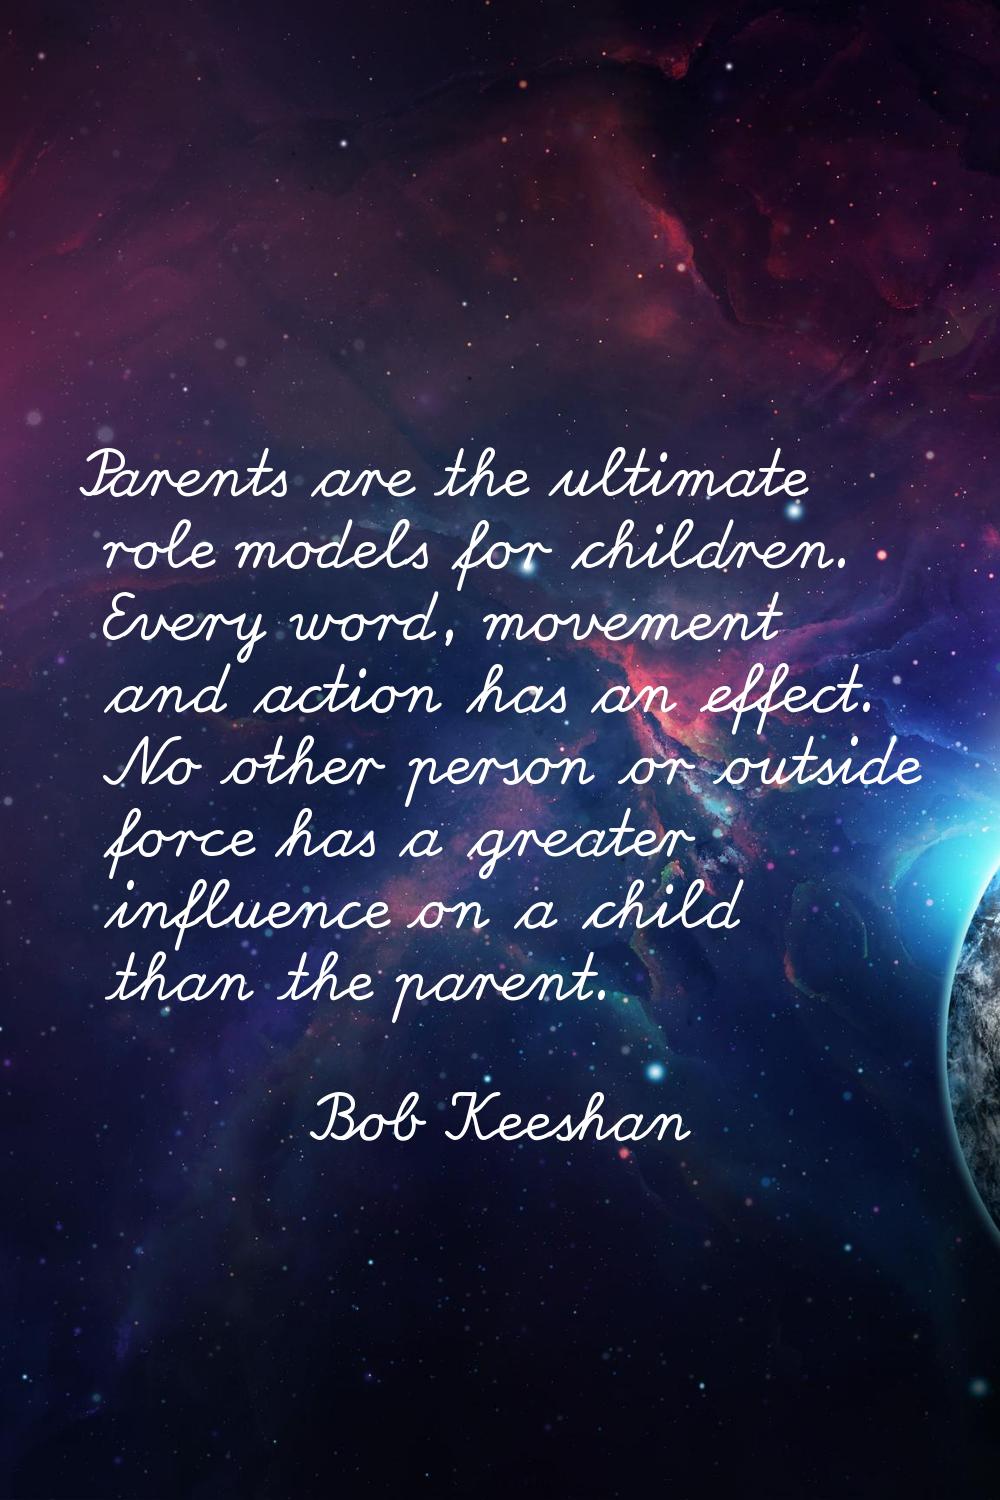 Parents are the ultimate role models for children. Every word, movement and action has an effect. N